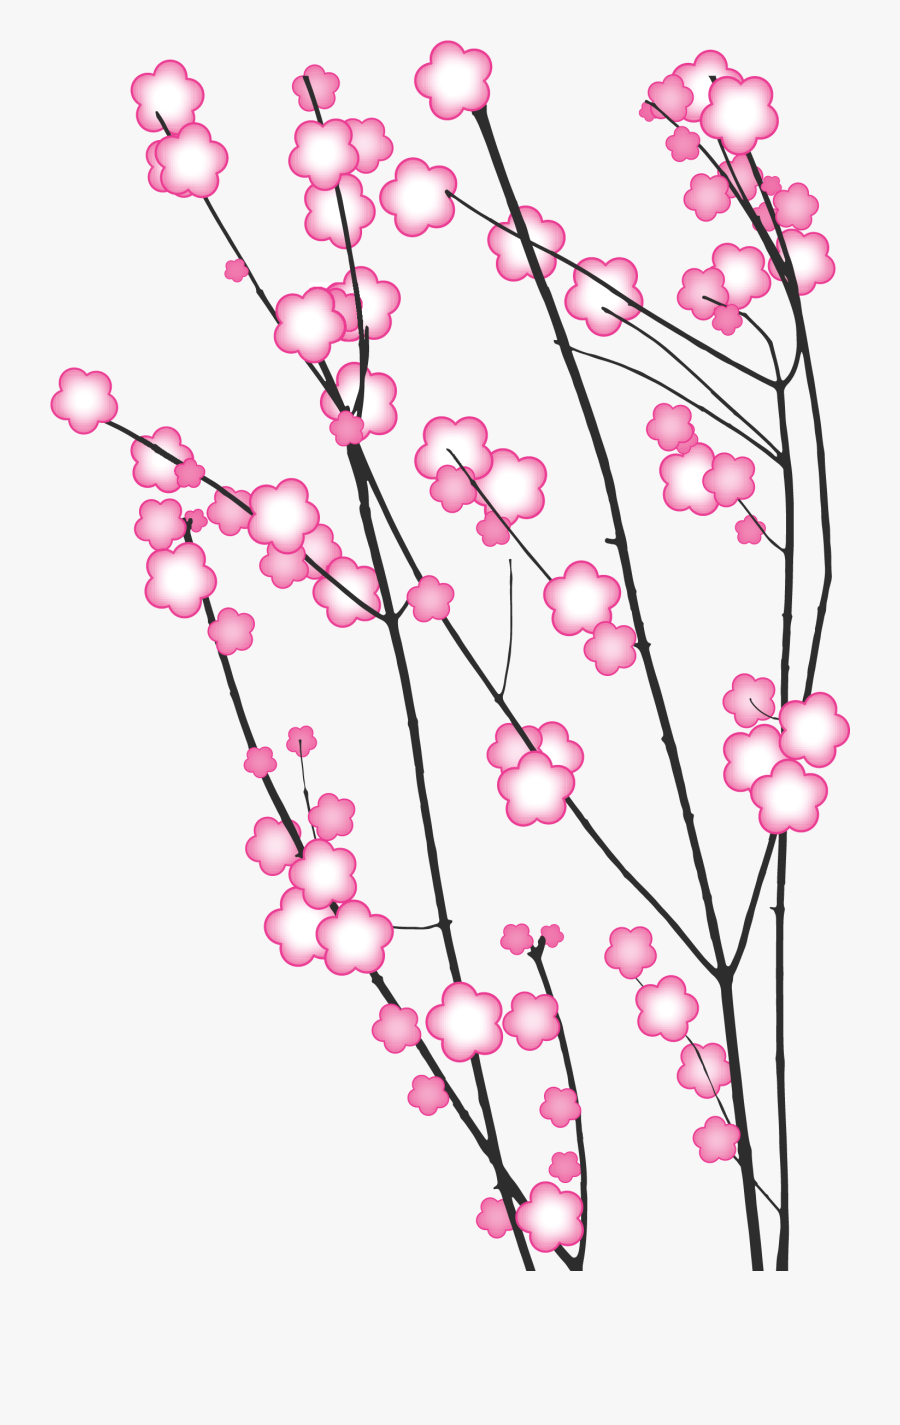 Cherry Blossoms - Cherry Blossom Illustrations Png, Transparent Clipart